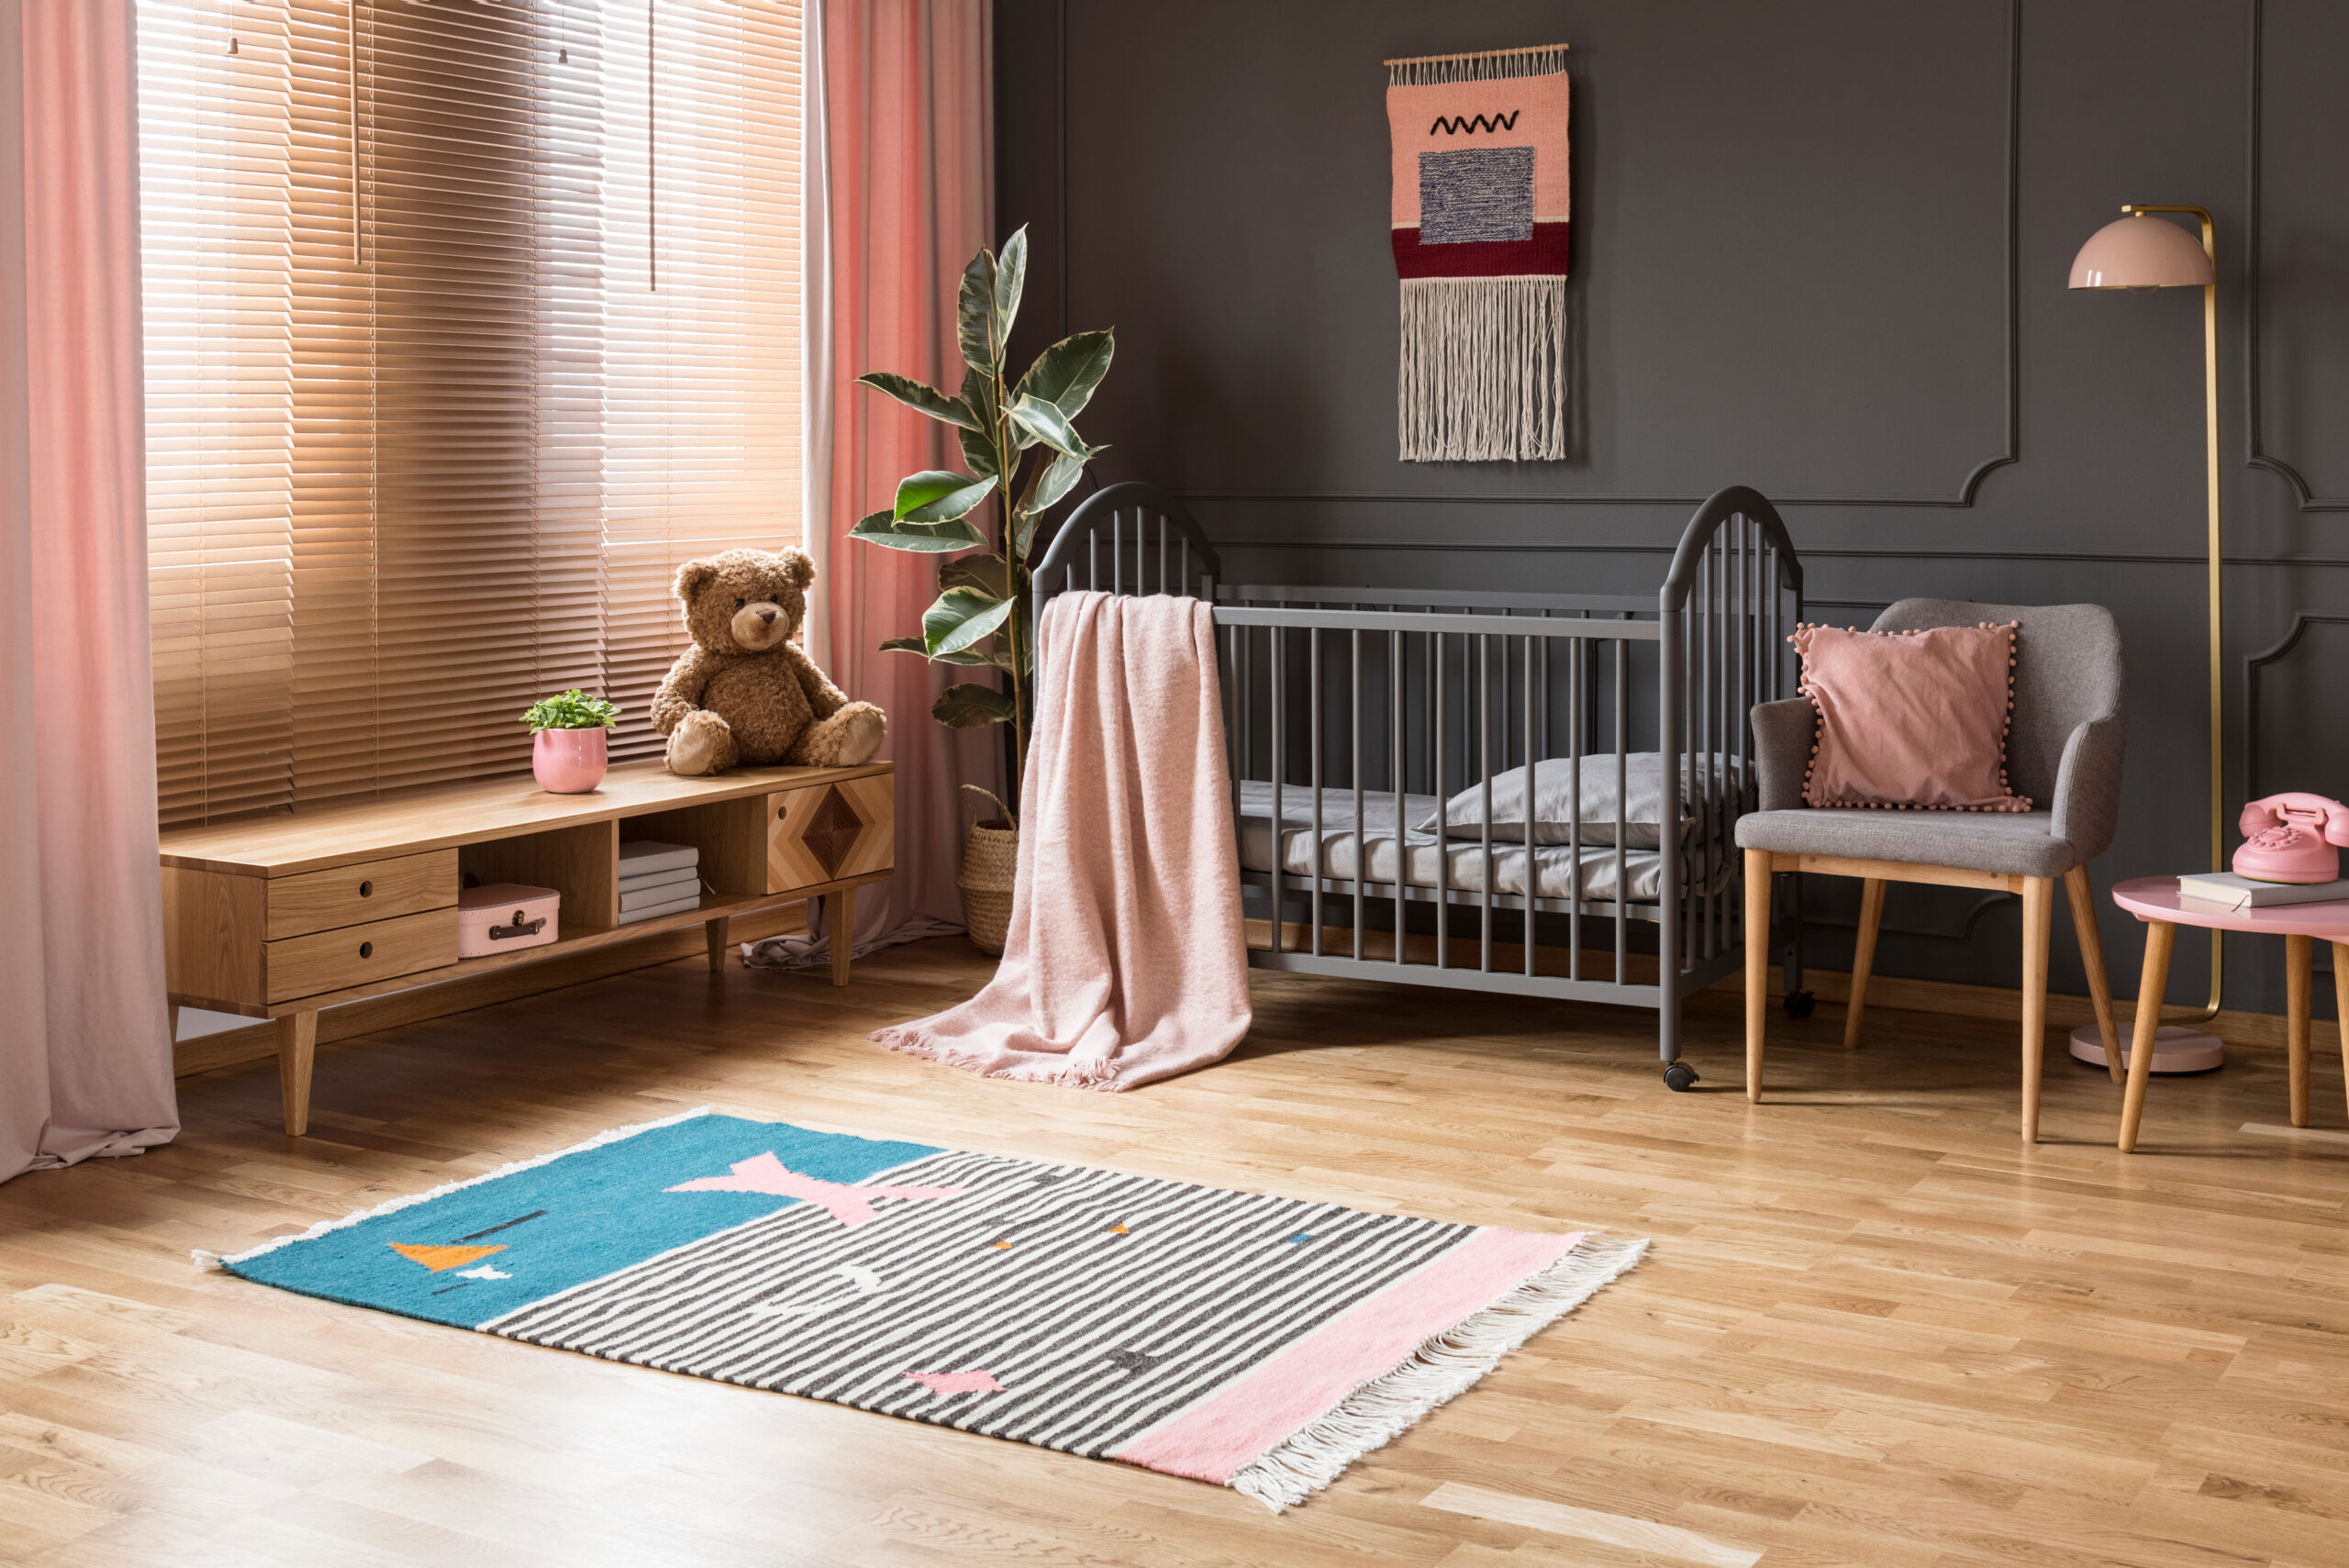 7 things you should consider when designing your baby’s nursery 1